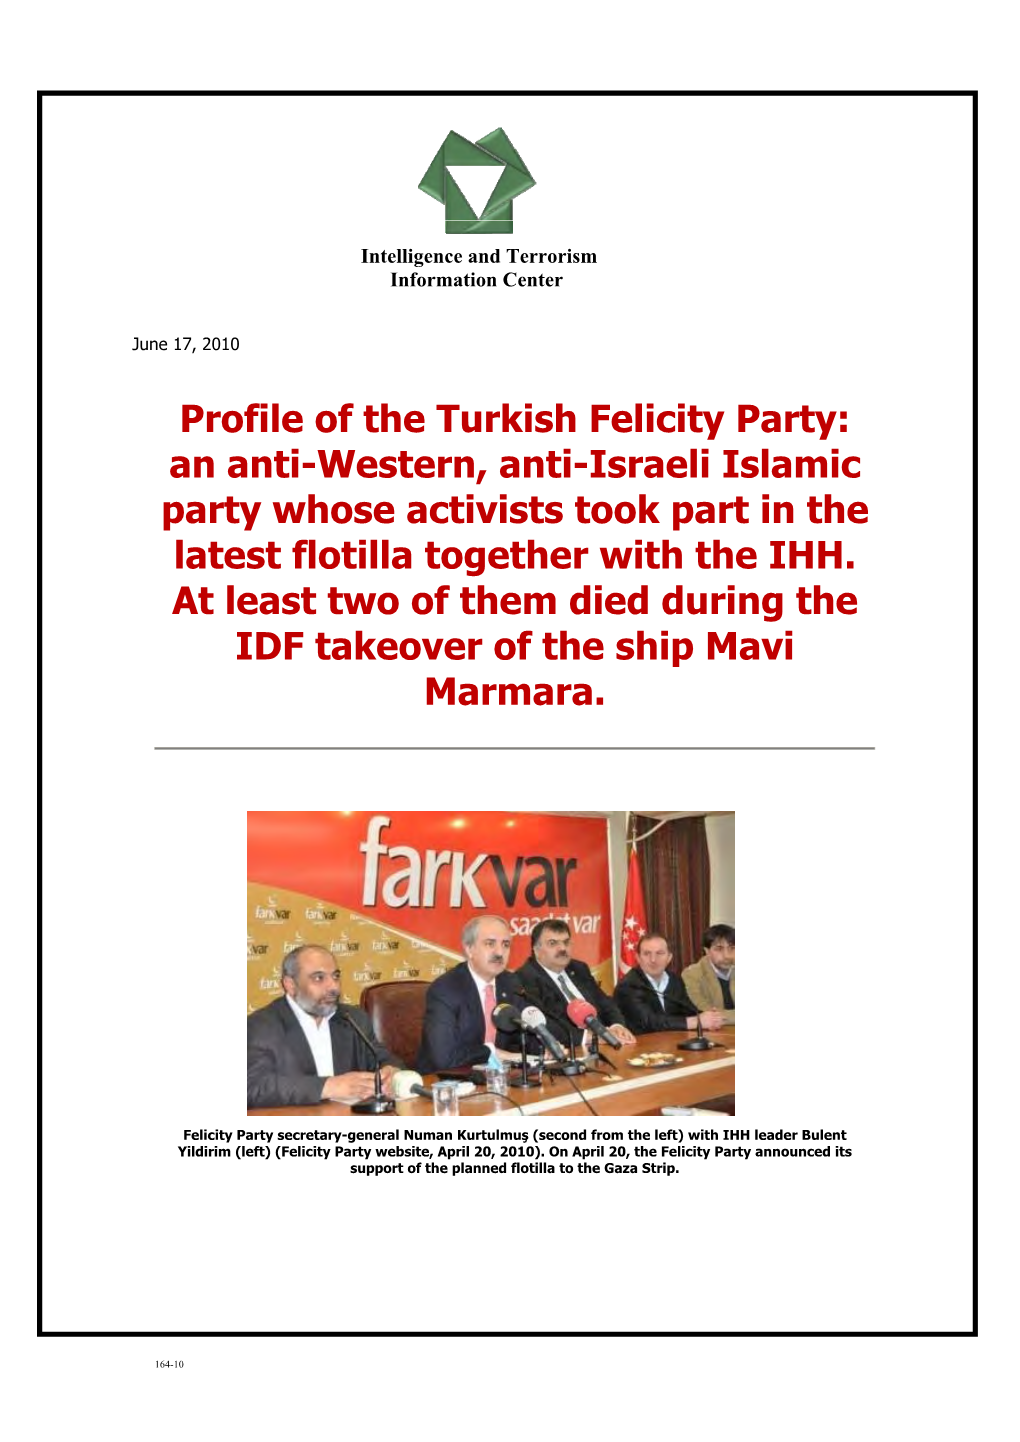 Profile of the Turkish Felicity Party: an Anti-Western, Anti-Israeli Islamic Party Whose Activists Took Part in the Latest Flotilla Together with the IHH